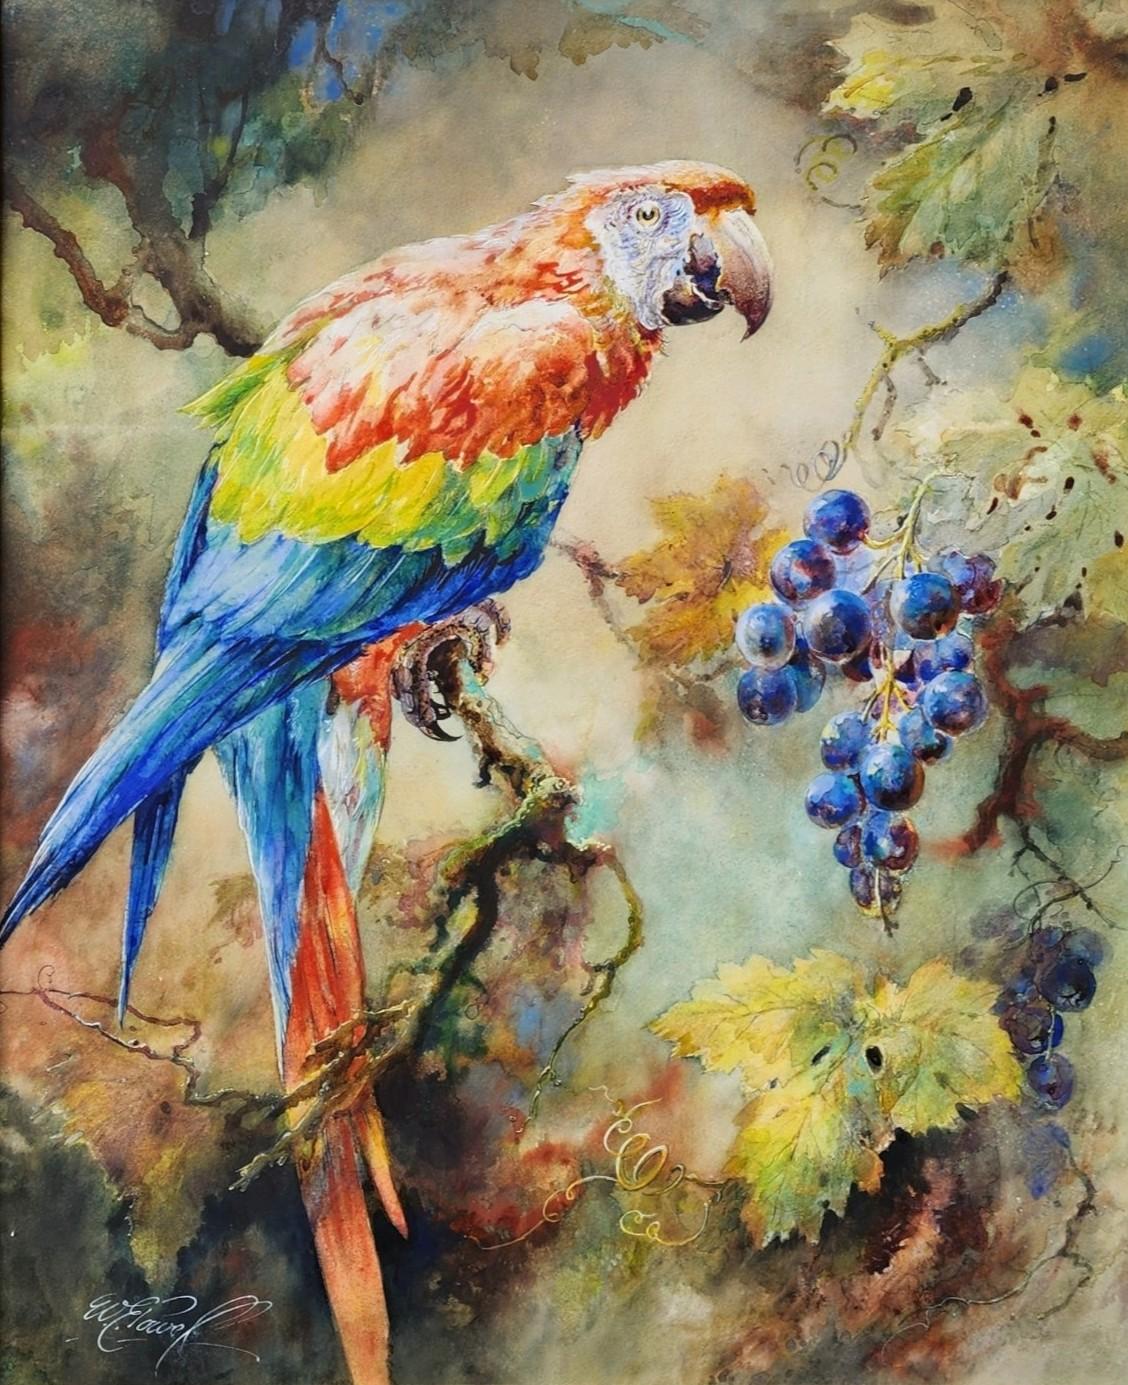 Contemplation, 1910 Scarlet Macaw, Ornithology, Naturalist, Bird Portrait - Painting by William Edward Powell